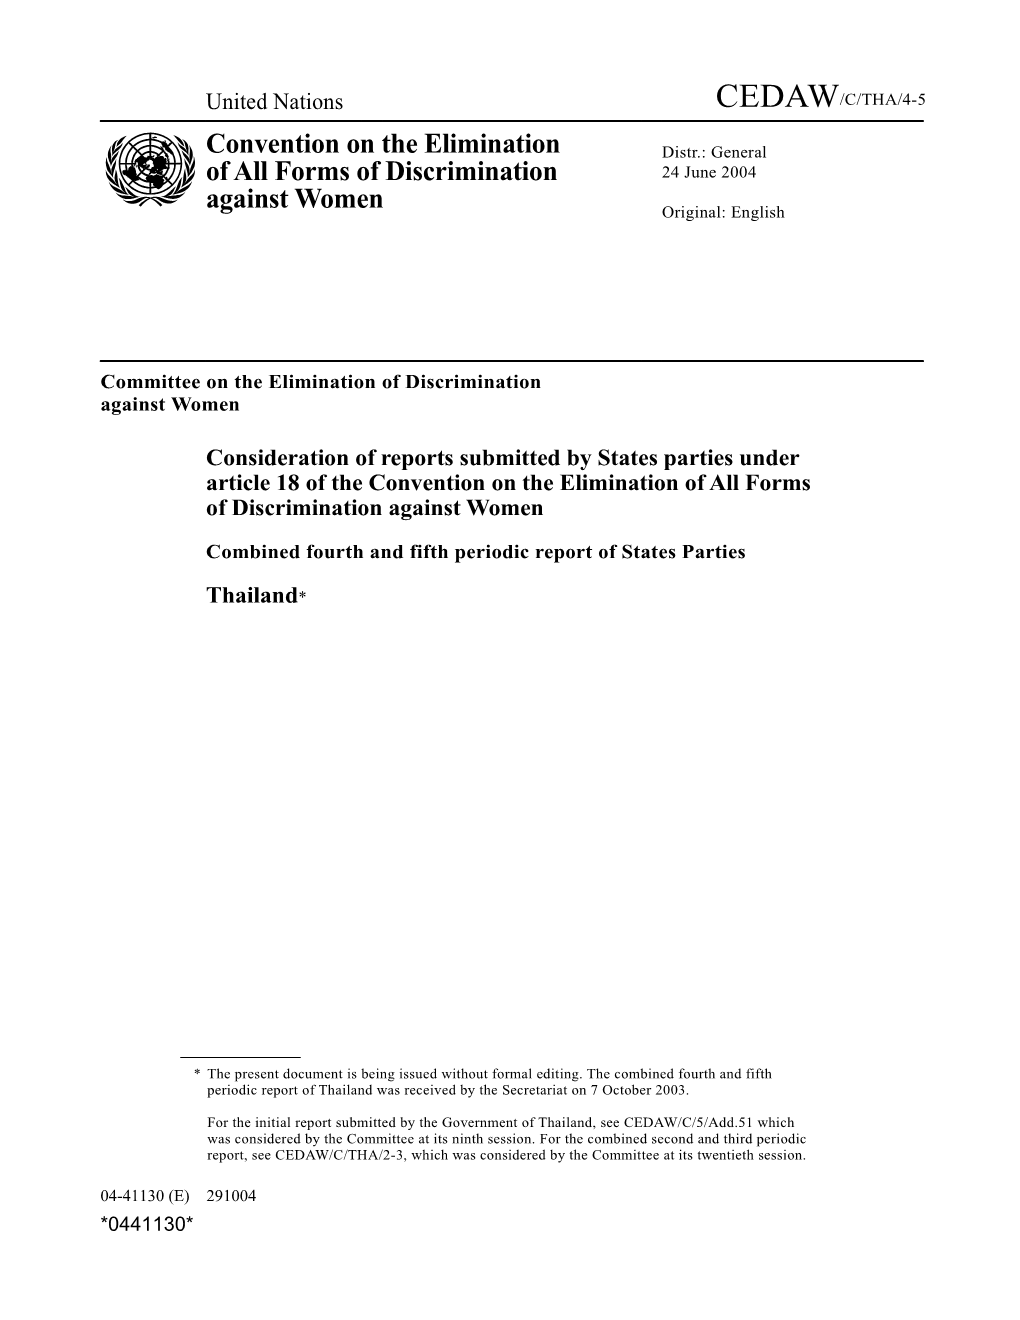 Combined Fourth and Fifth Periodic Report of States Parties